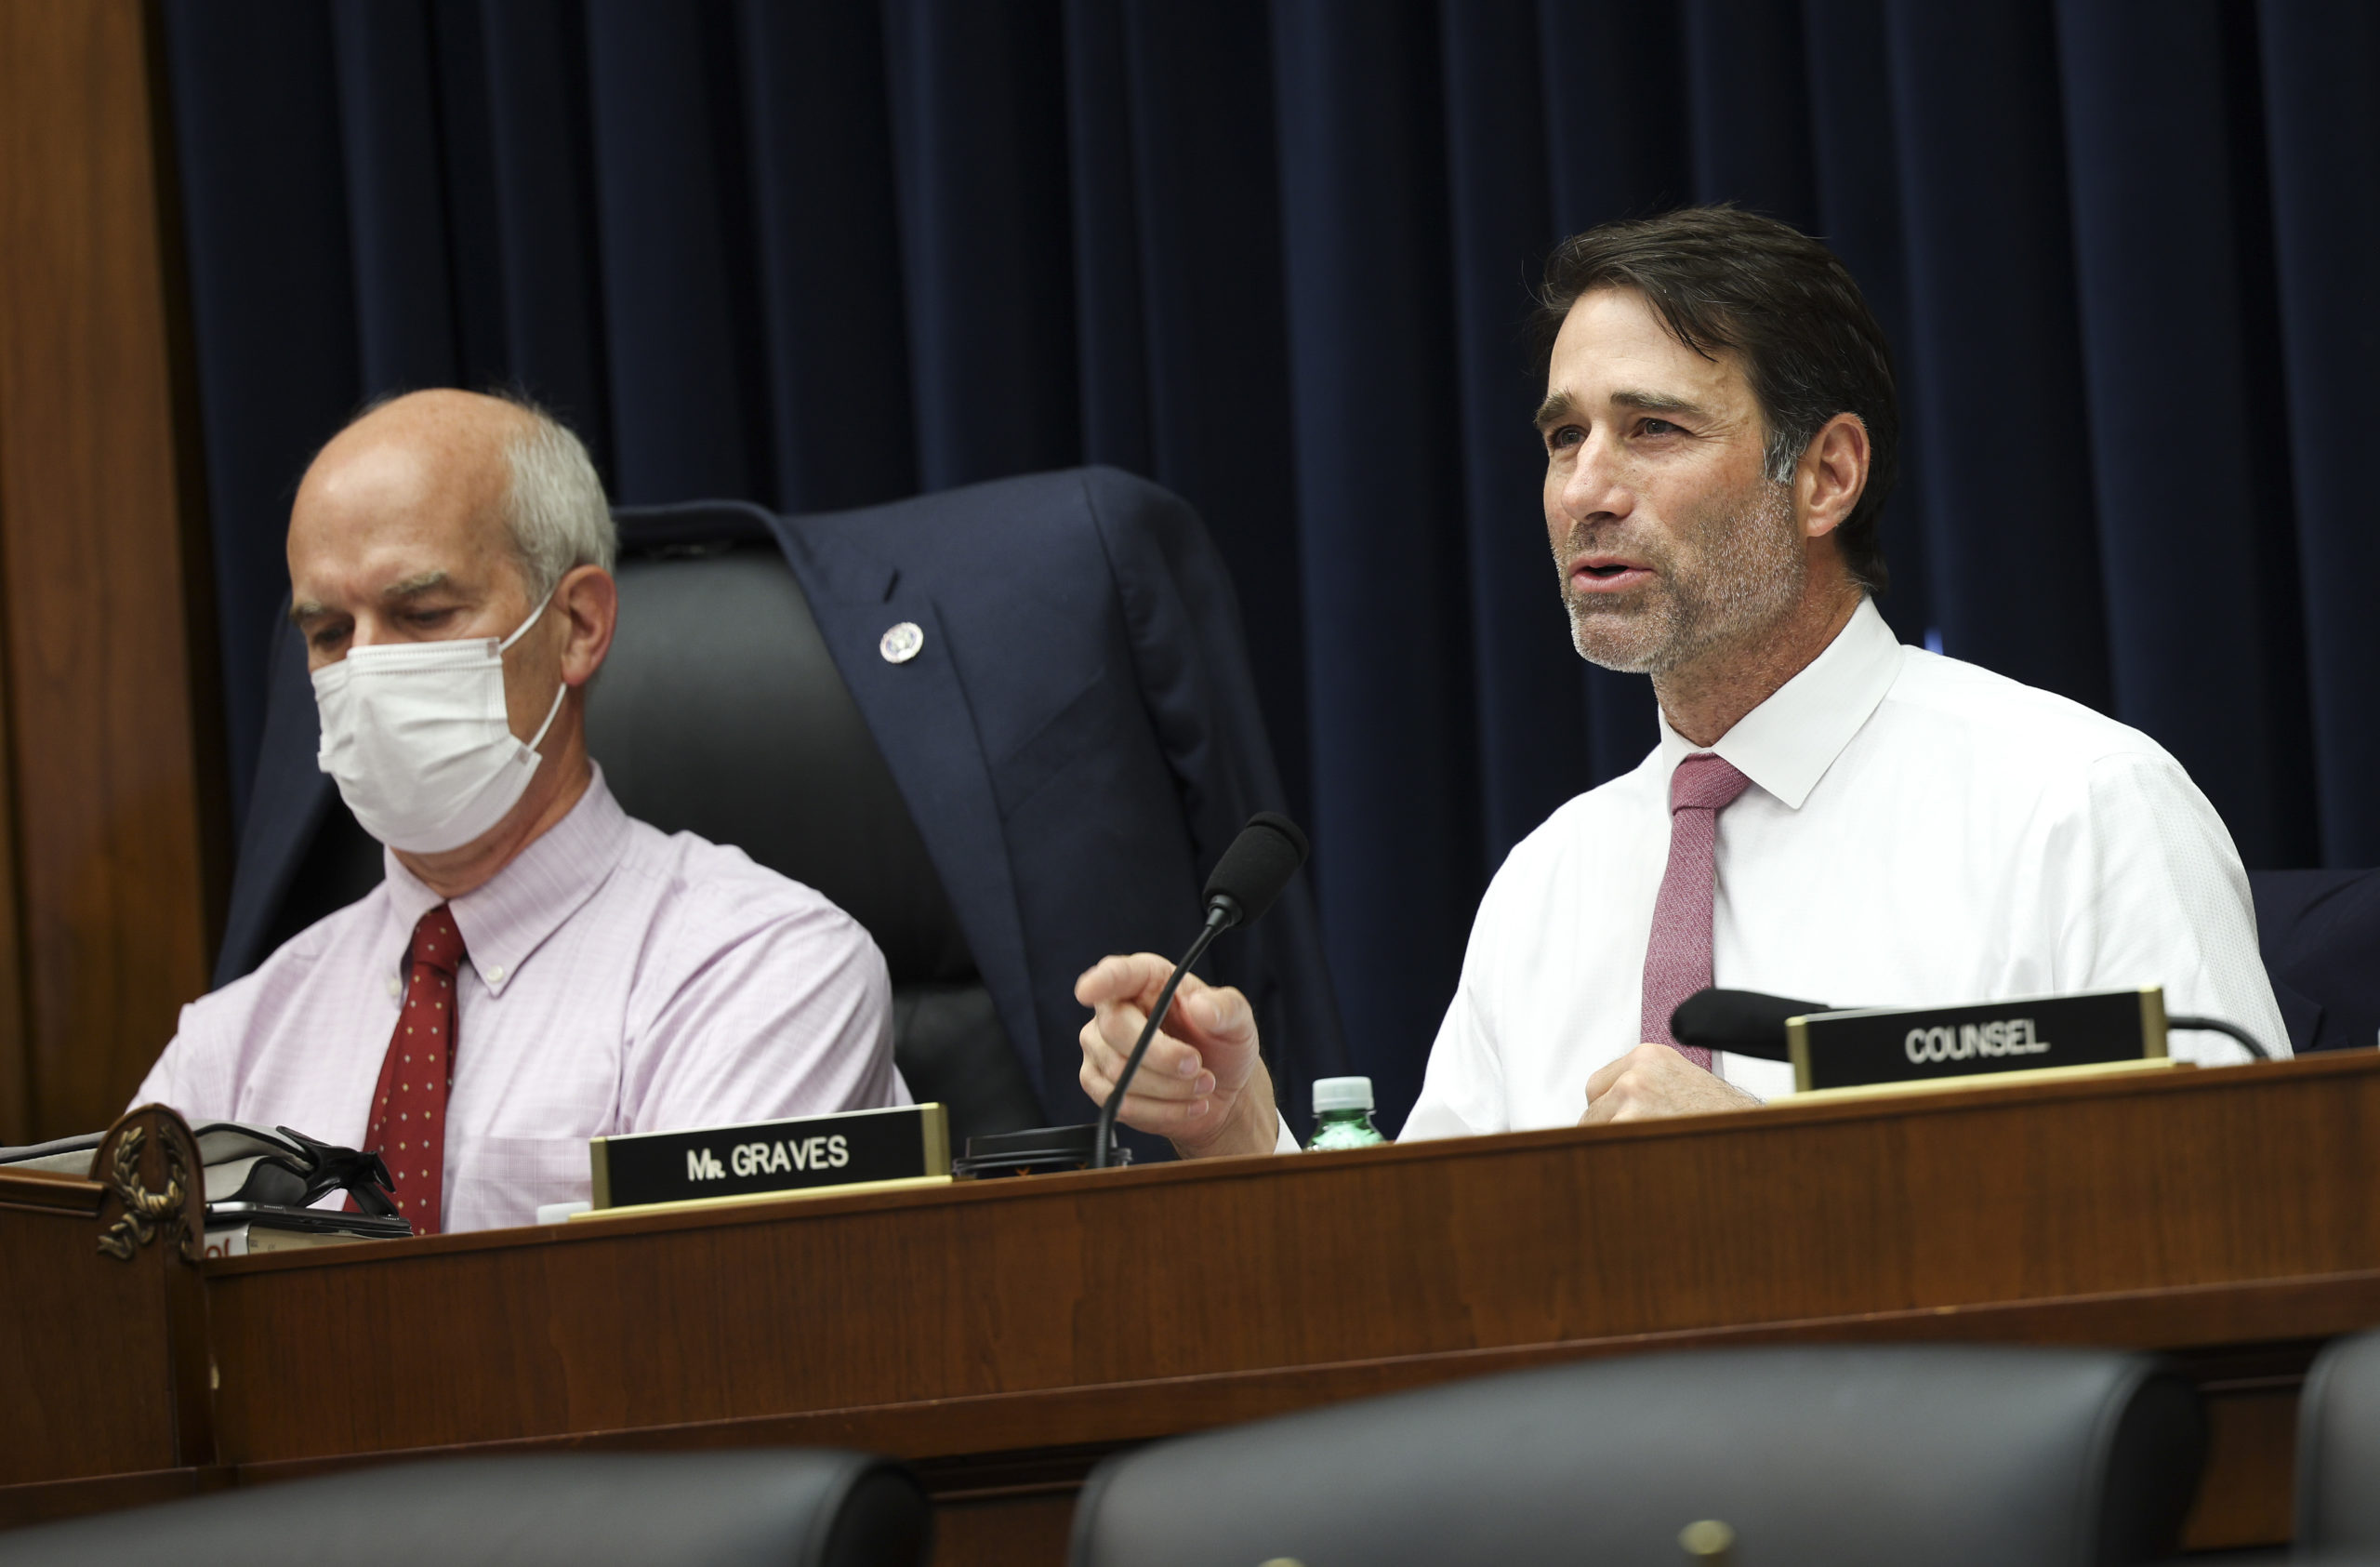 Republican Rep. Garret Graves participates in a House hearing on Sept. 23, 2021 in Washington, D.C. (Kevin Dietsch/Getty Images)